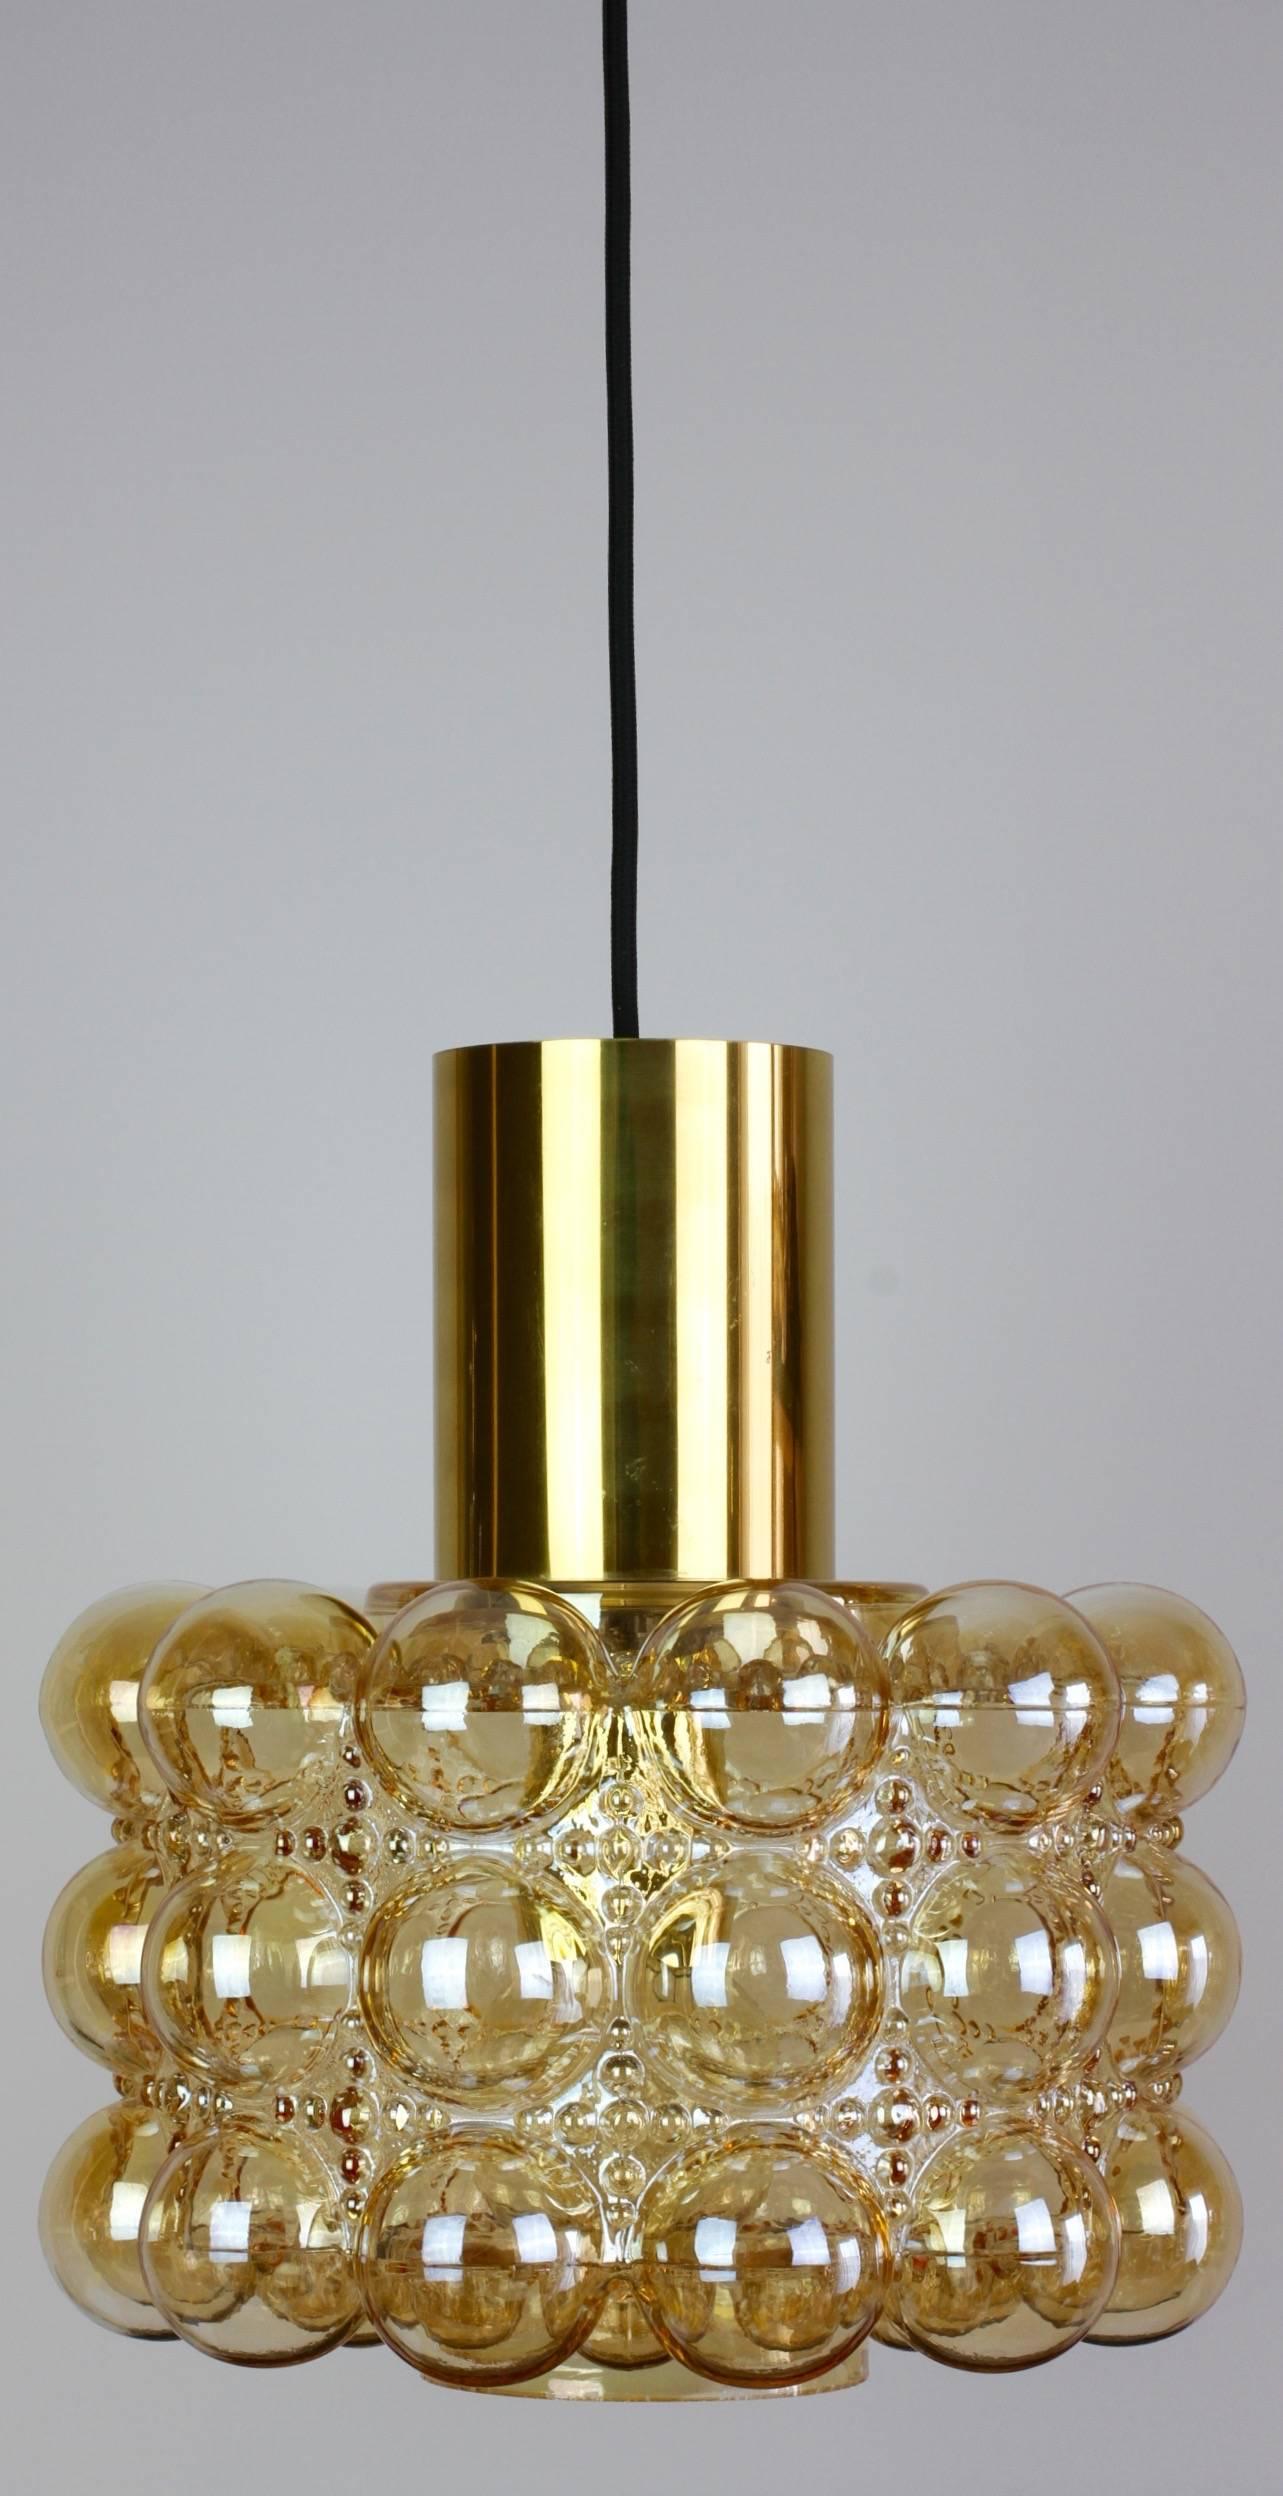 Late 1960s extra large bubble glass ceiling pendant light designed by Helena Tynell for Glashütte Limburg. The light features a beautiful lampshade made from amber or champagne colored / coloured glass with a polished brass cylinder on top.